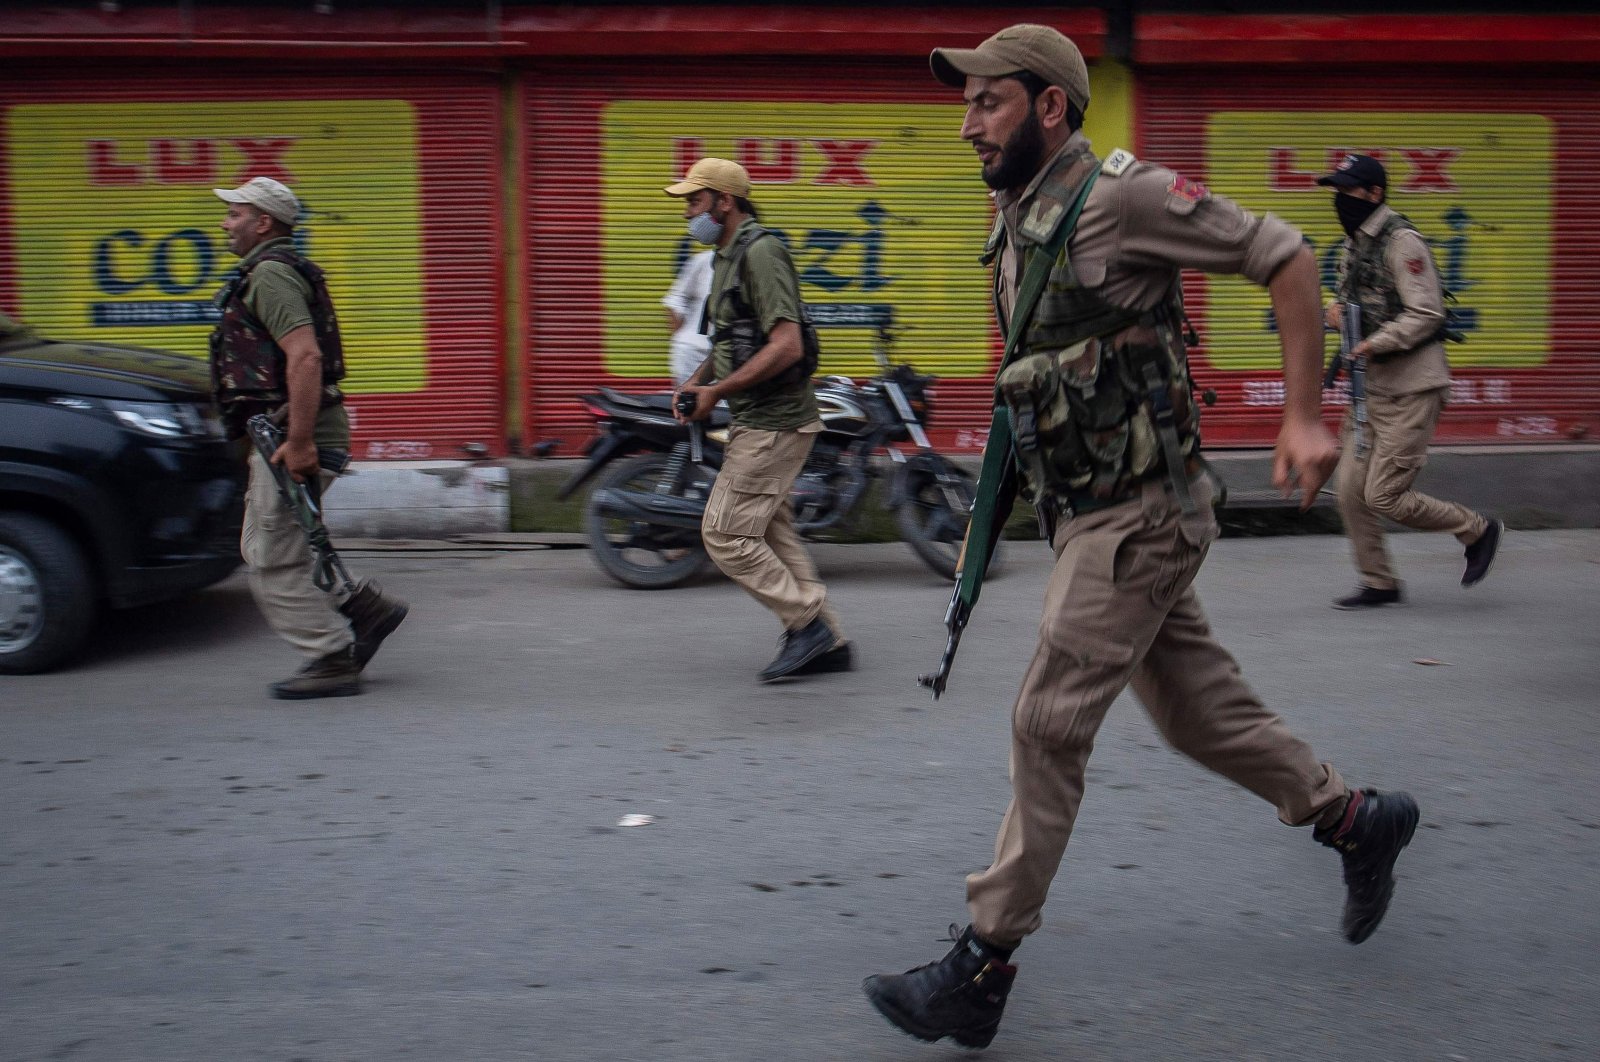 Police arrive at the site of a shootout in the Khanyar area of downtown Srinagar where a policeman and a civilian were reportedly injured after a militant attack, Srinagar, Kashmir, August 3, 2021 (AFP Photo)